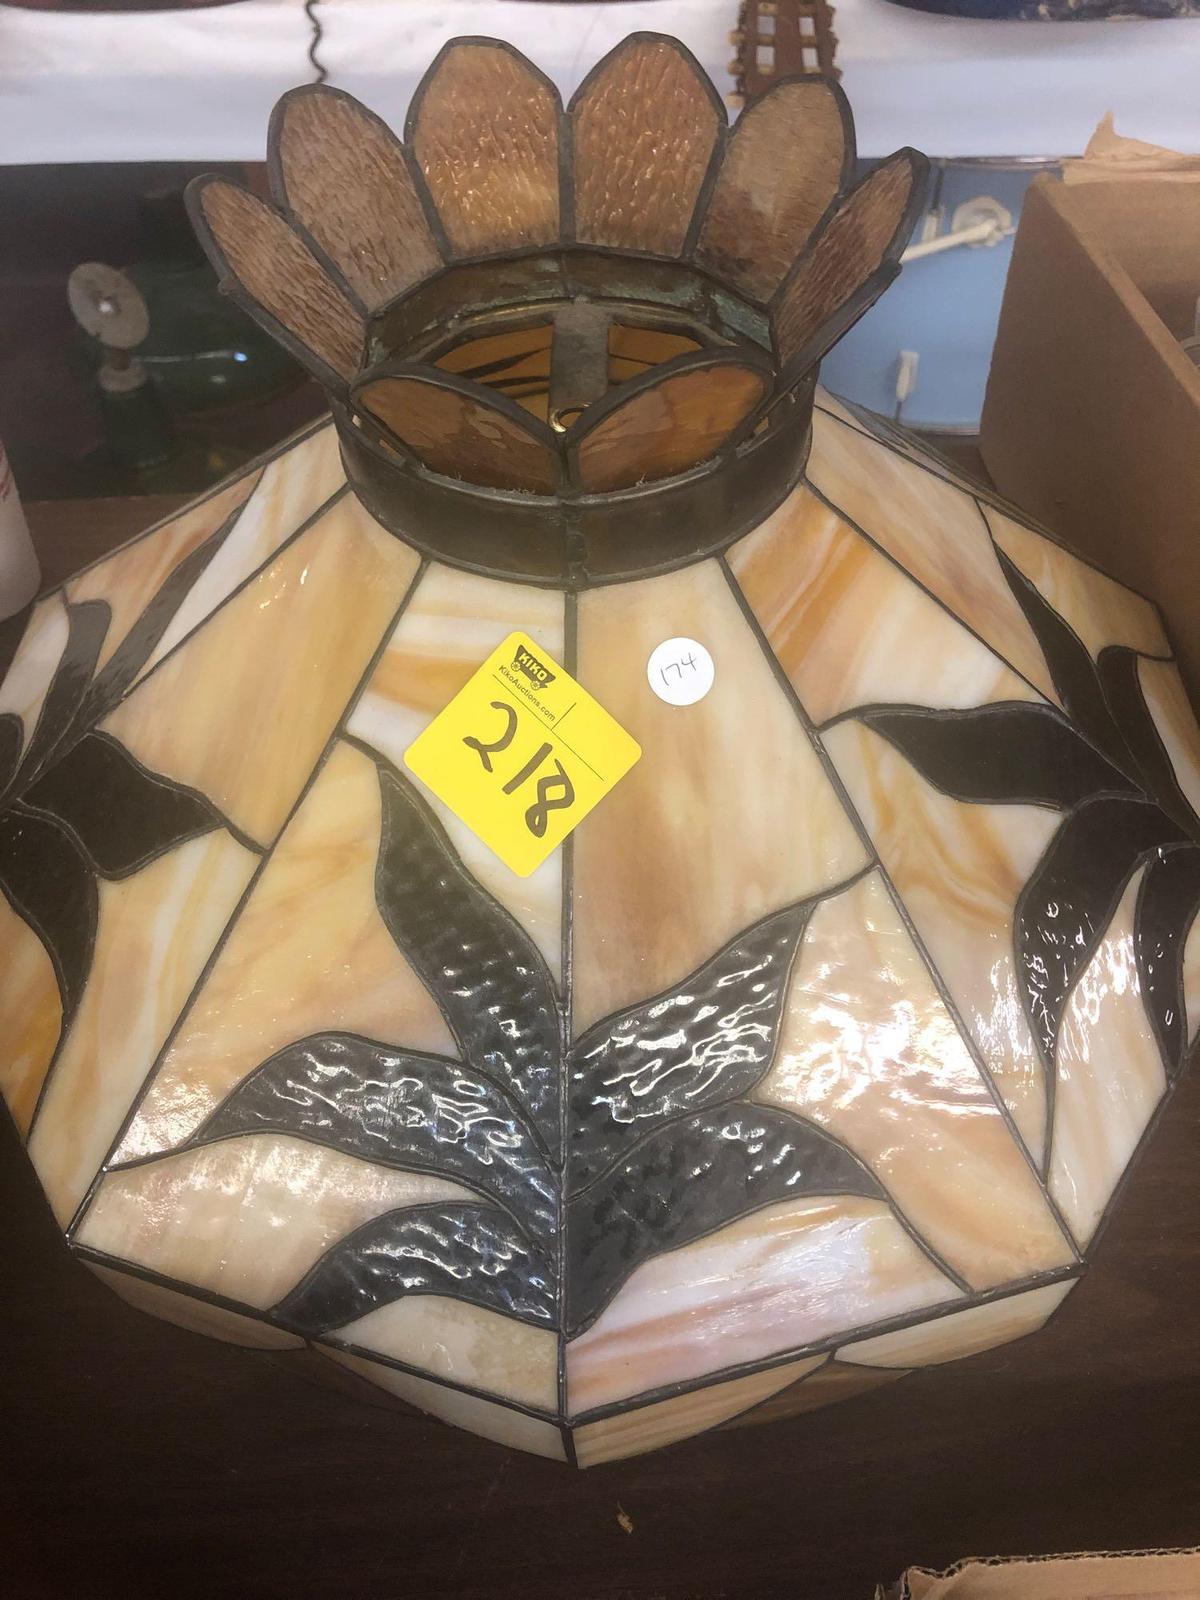 Stained glass hanging light fixture